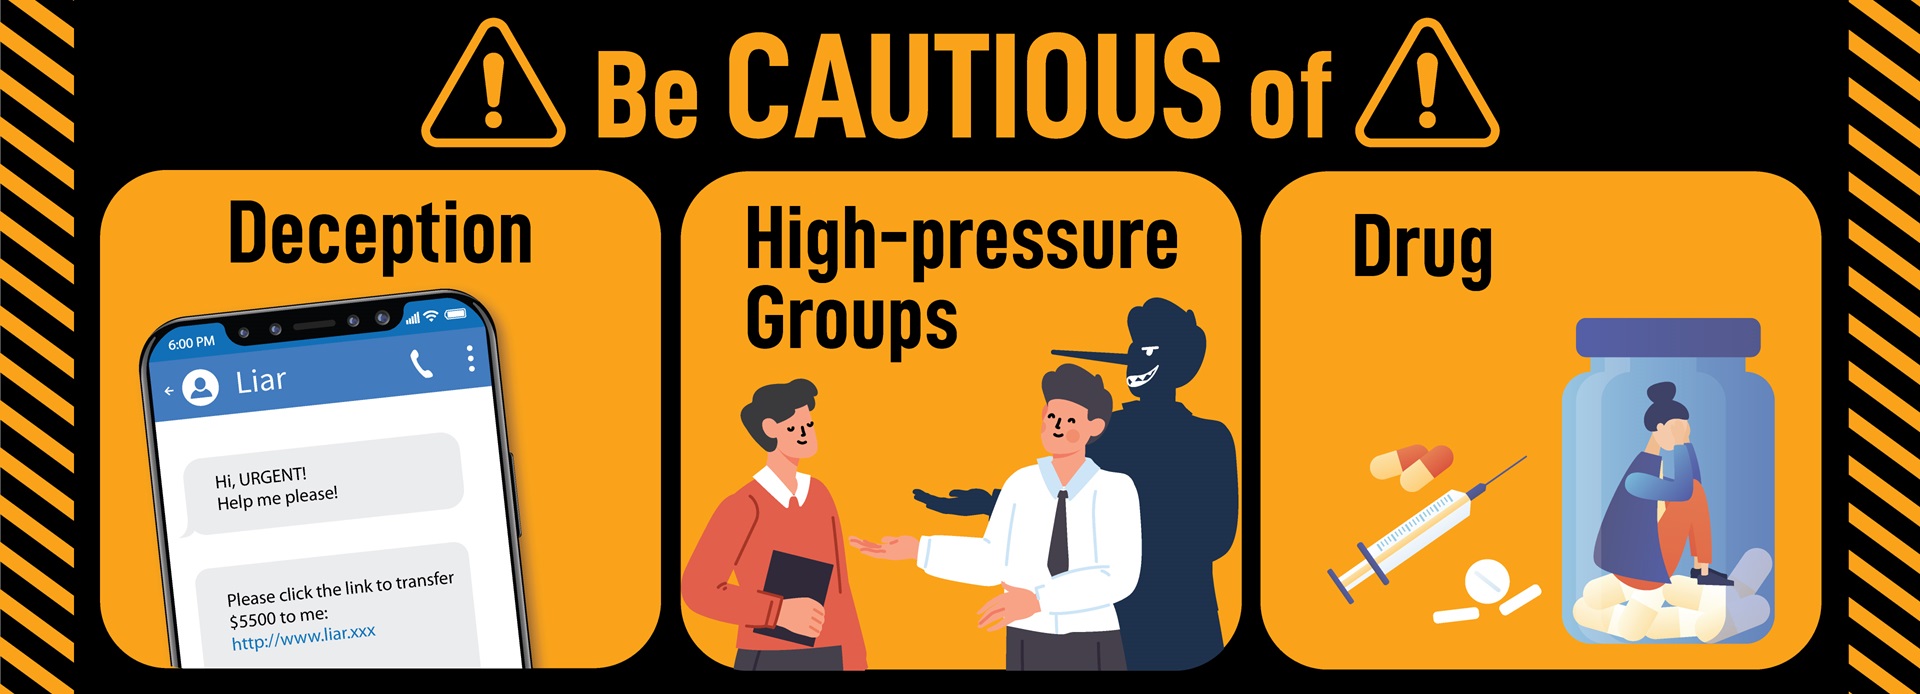 Be Cautious of Deception  High pressure GroupsUPDATED